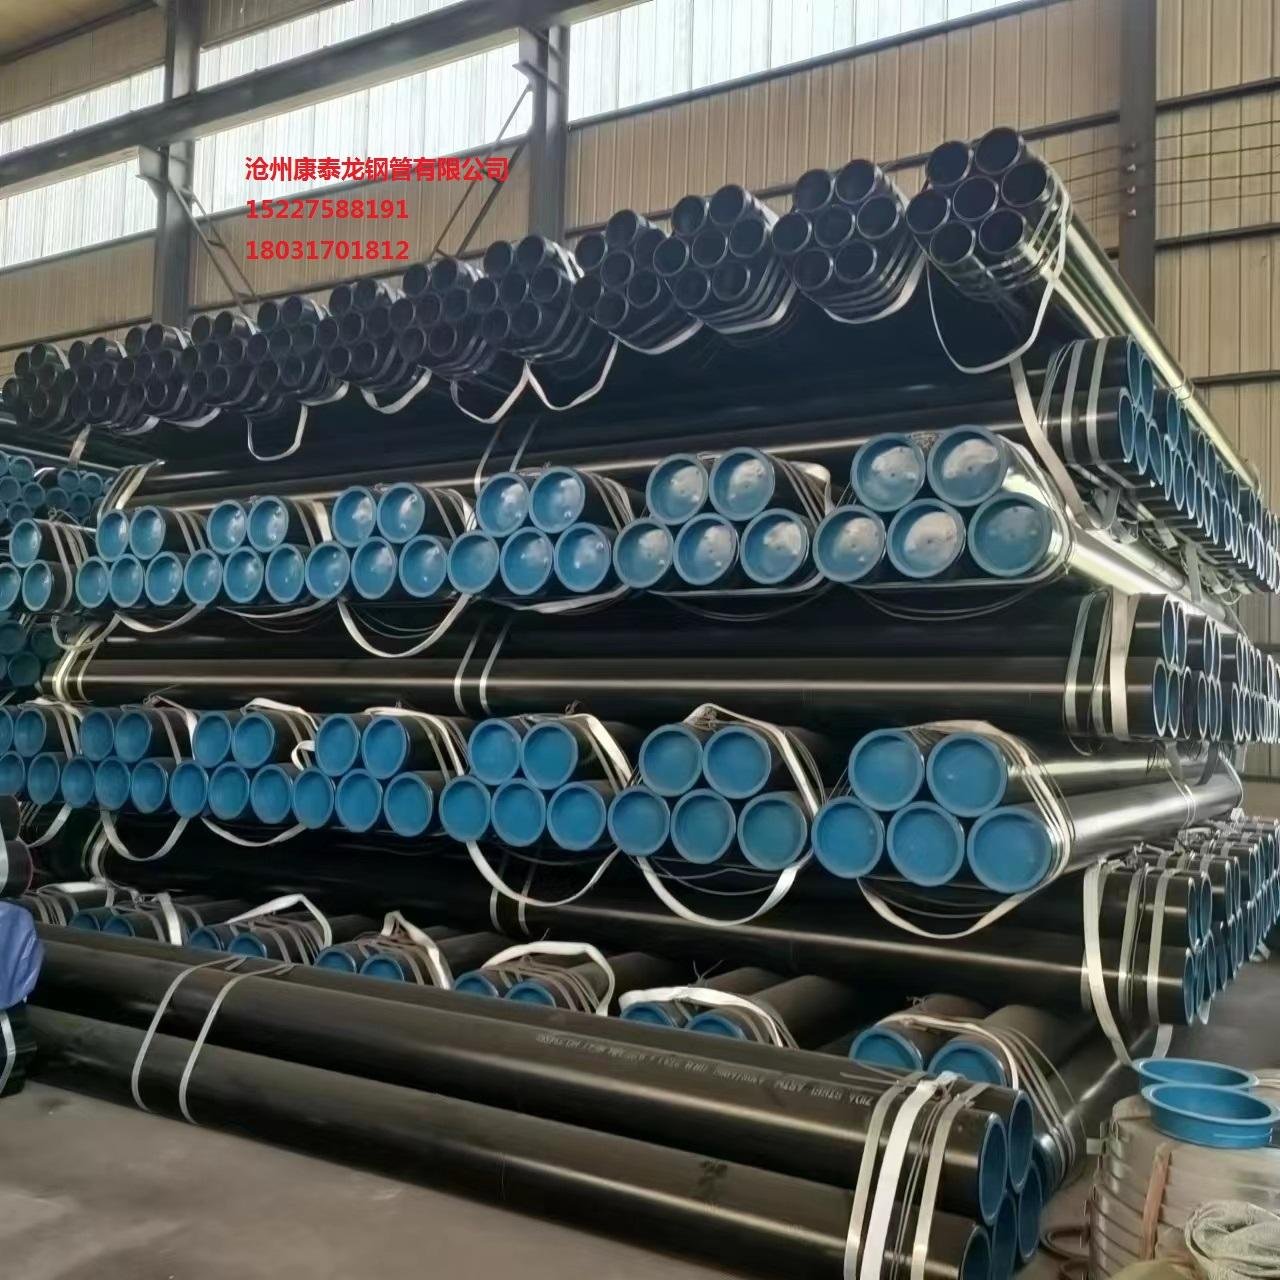 Tunnel special 48.3*5.08 carbon steel seamless pipe 4